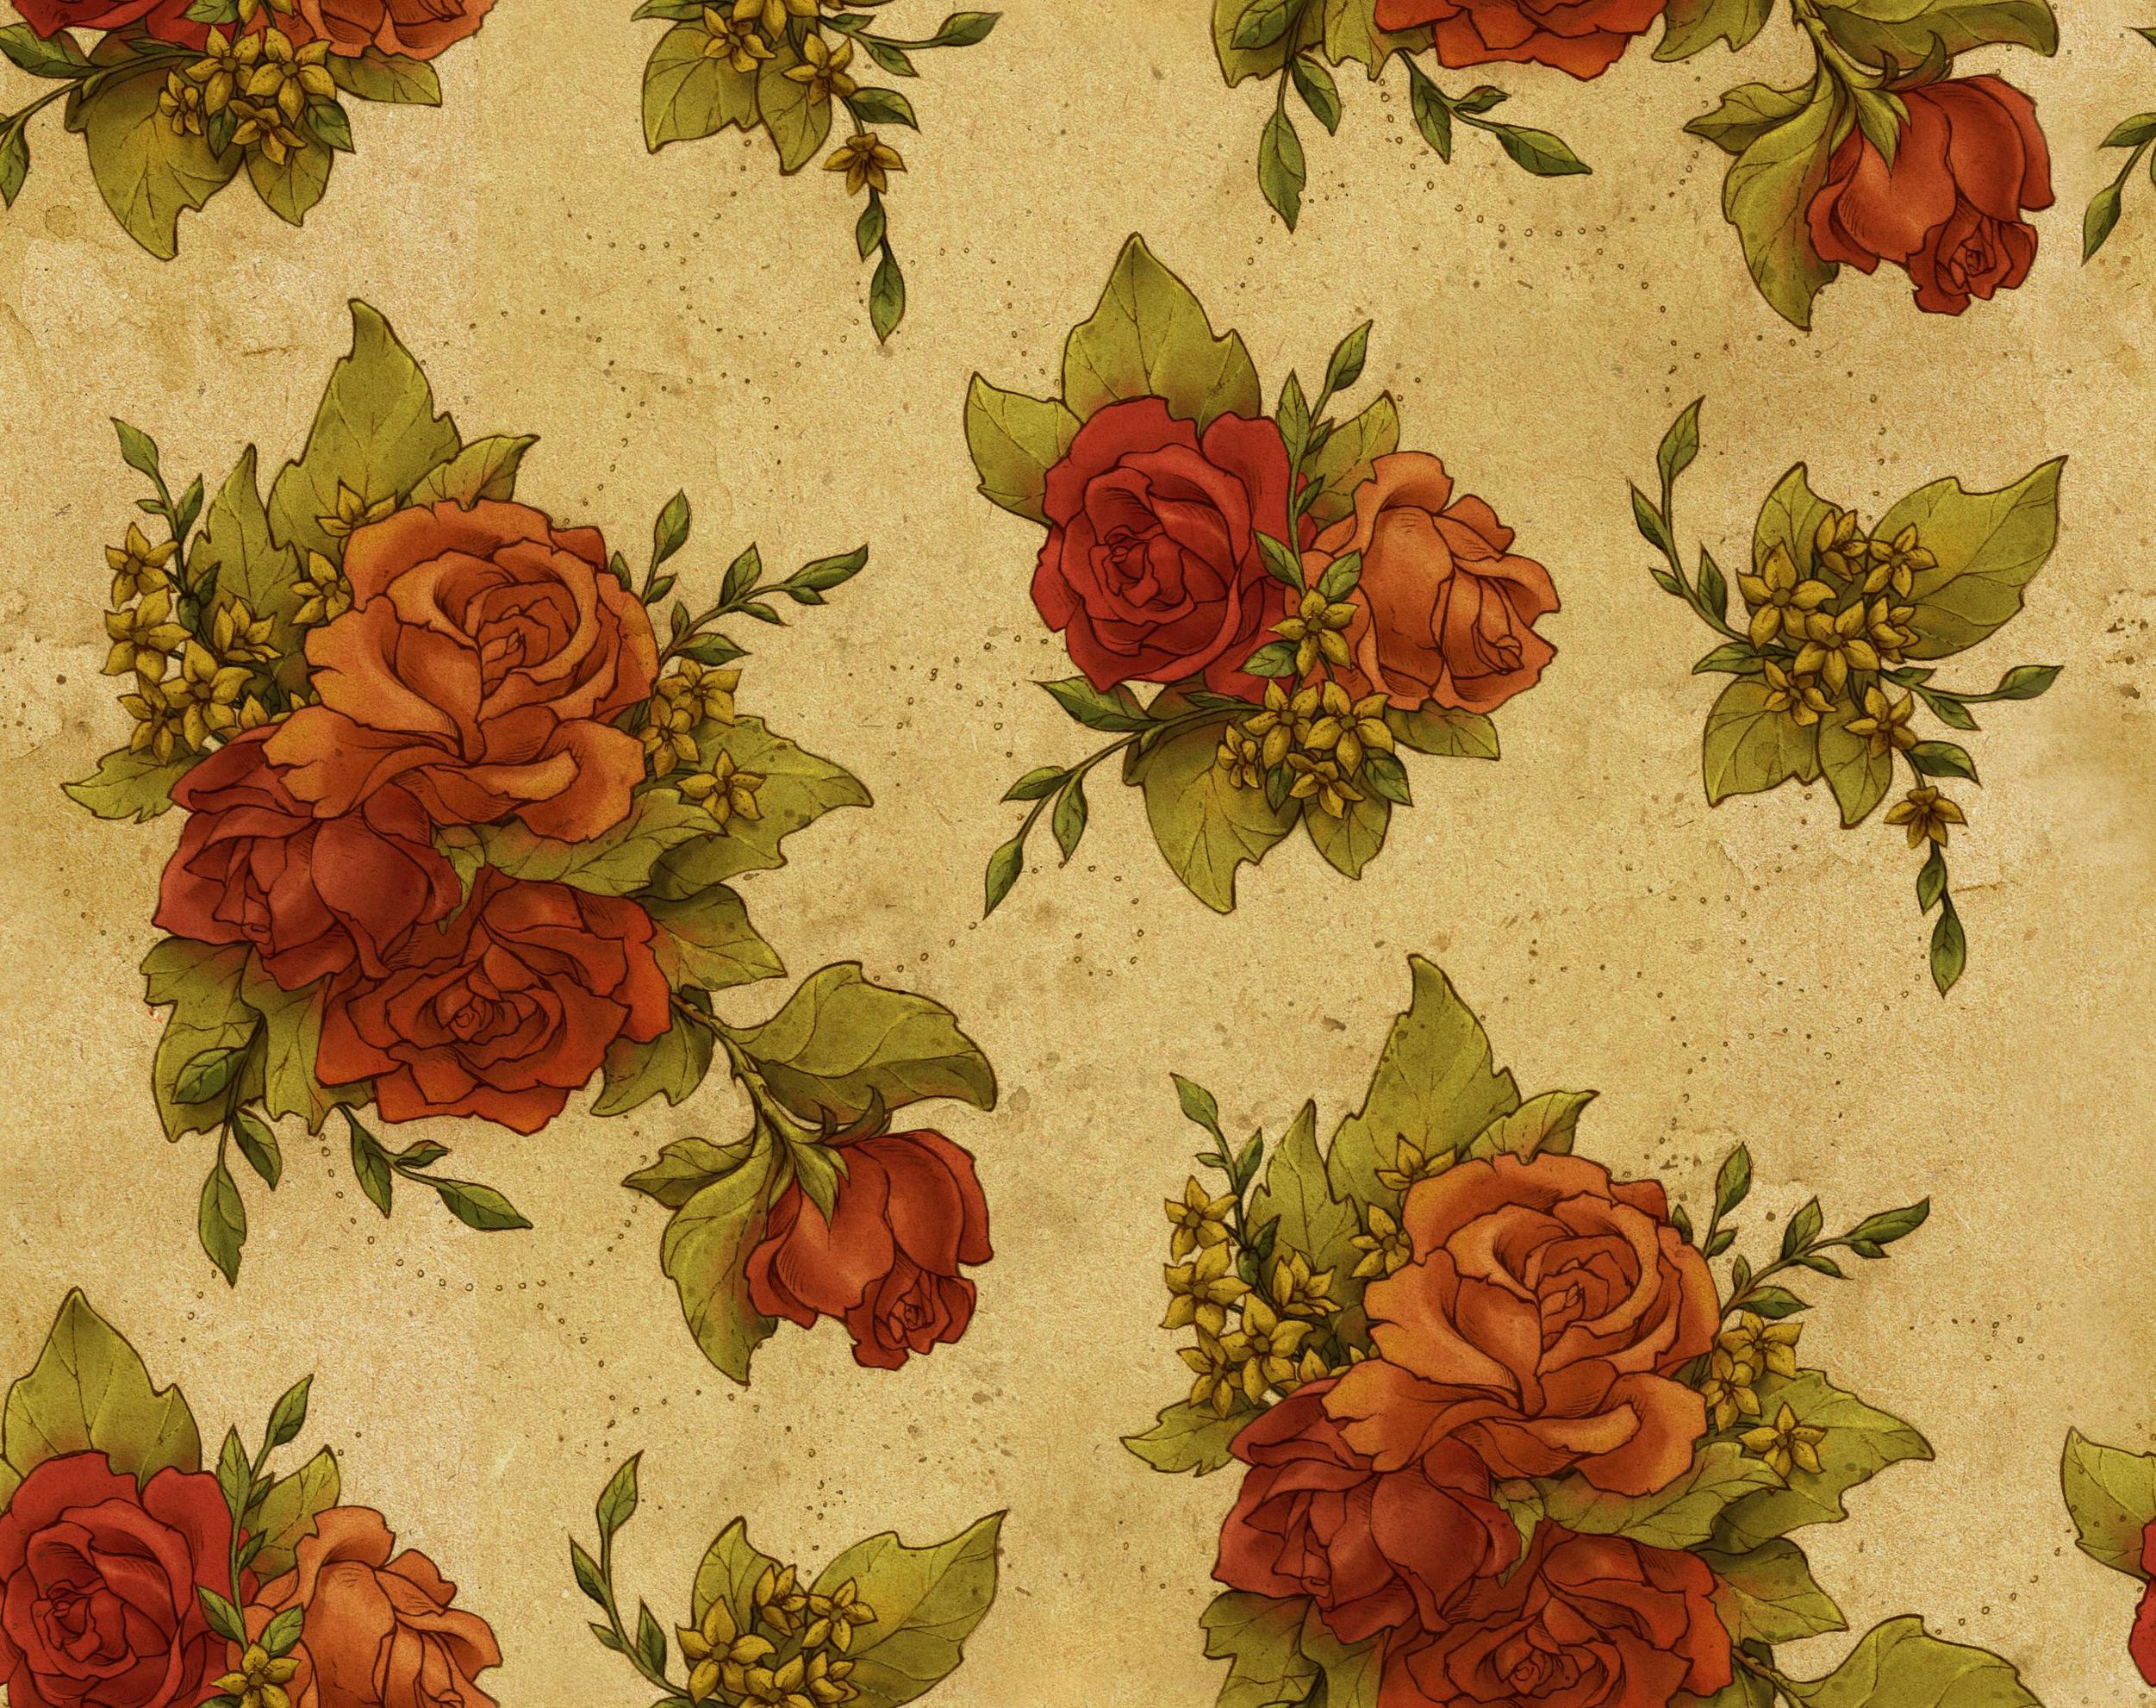 20 Perfect desktop background floral You Can Use It For Free ...